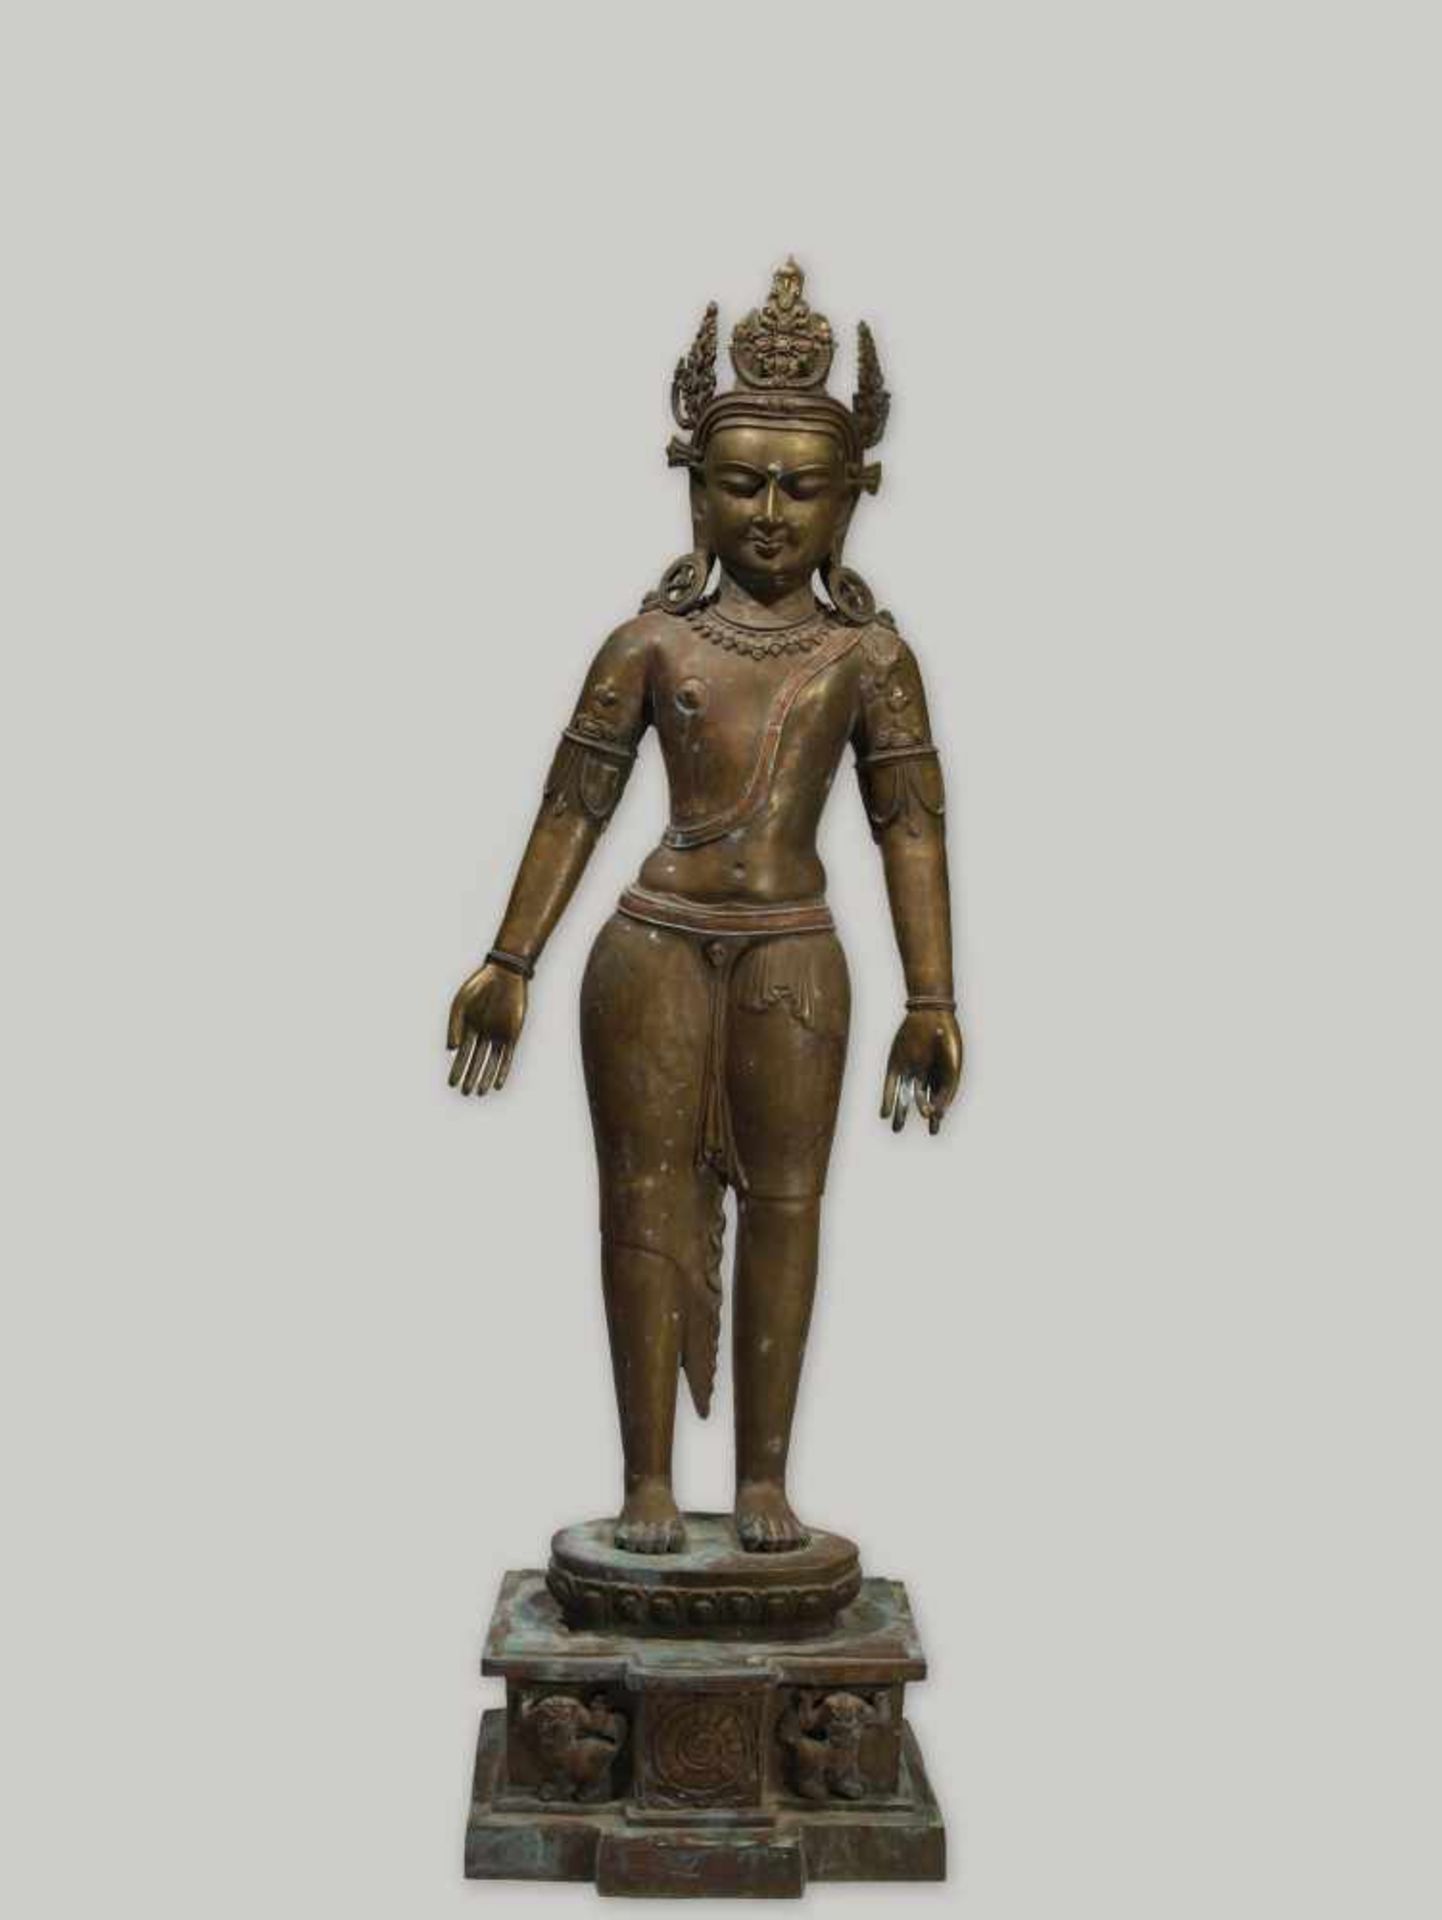 EXTREMLY LARGE STANDING BRONZE OF PADMAPANI Bronze with Copper and Silver inlays Tibet, 12th century